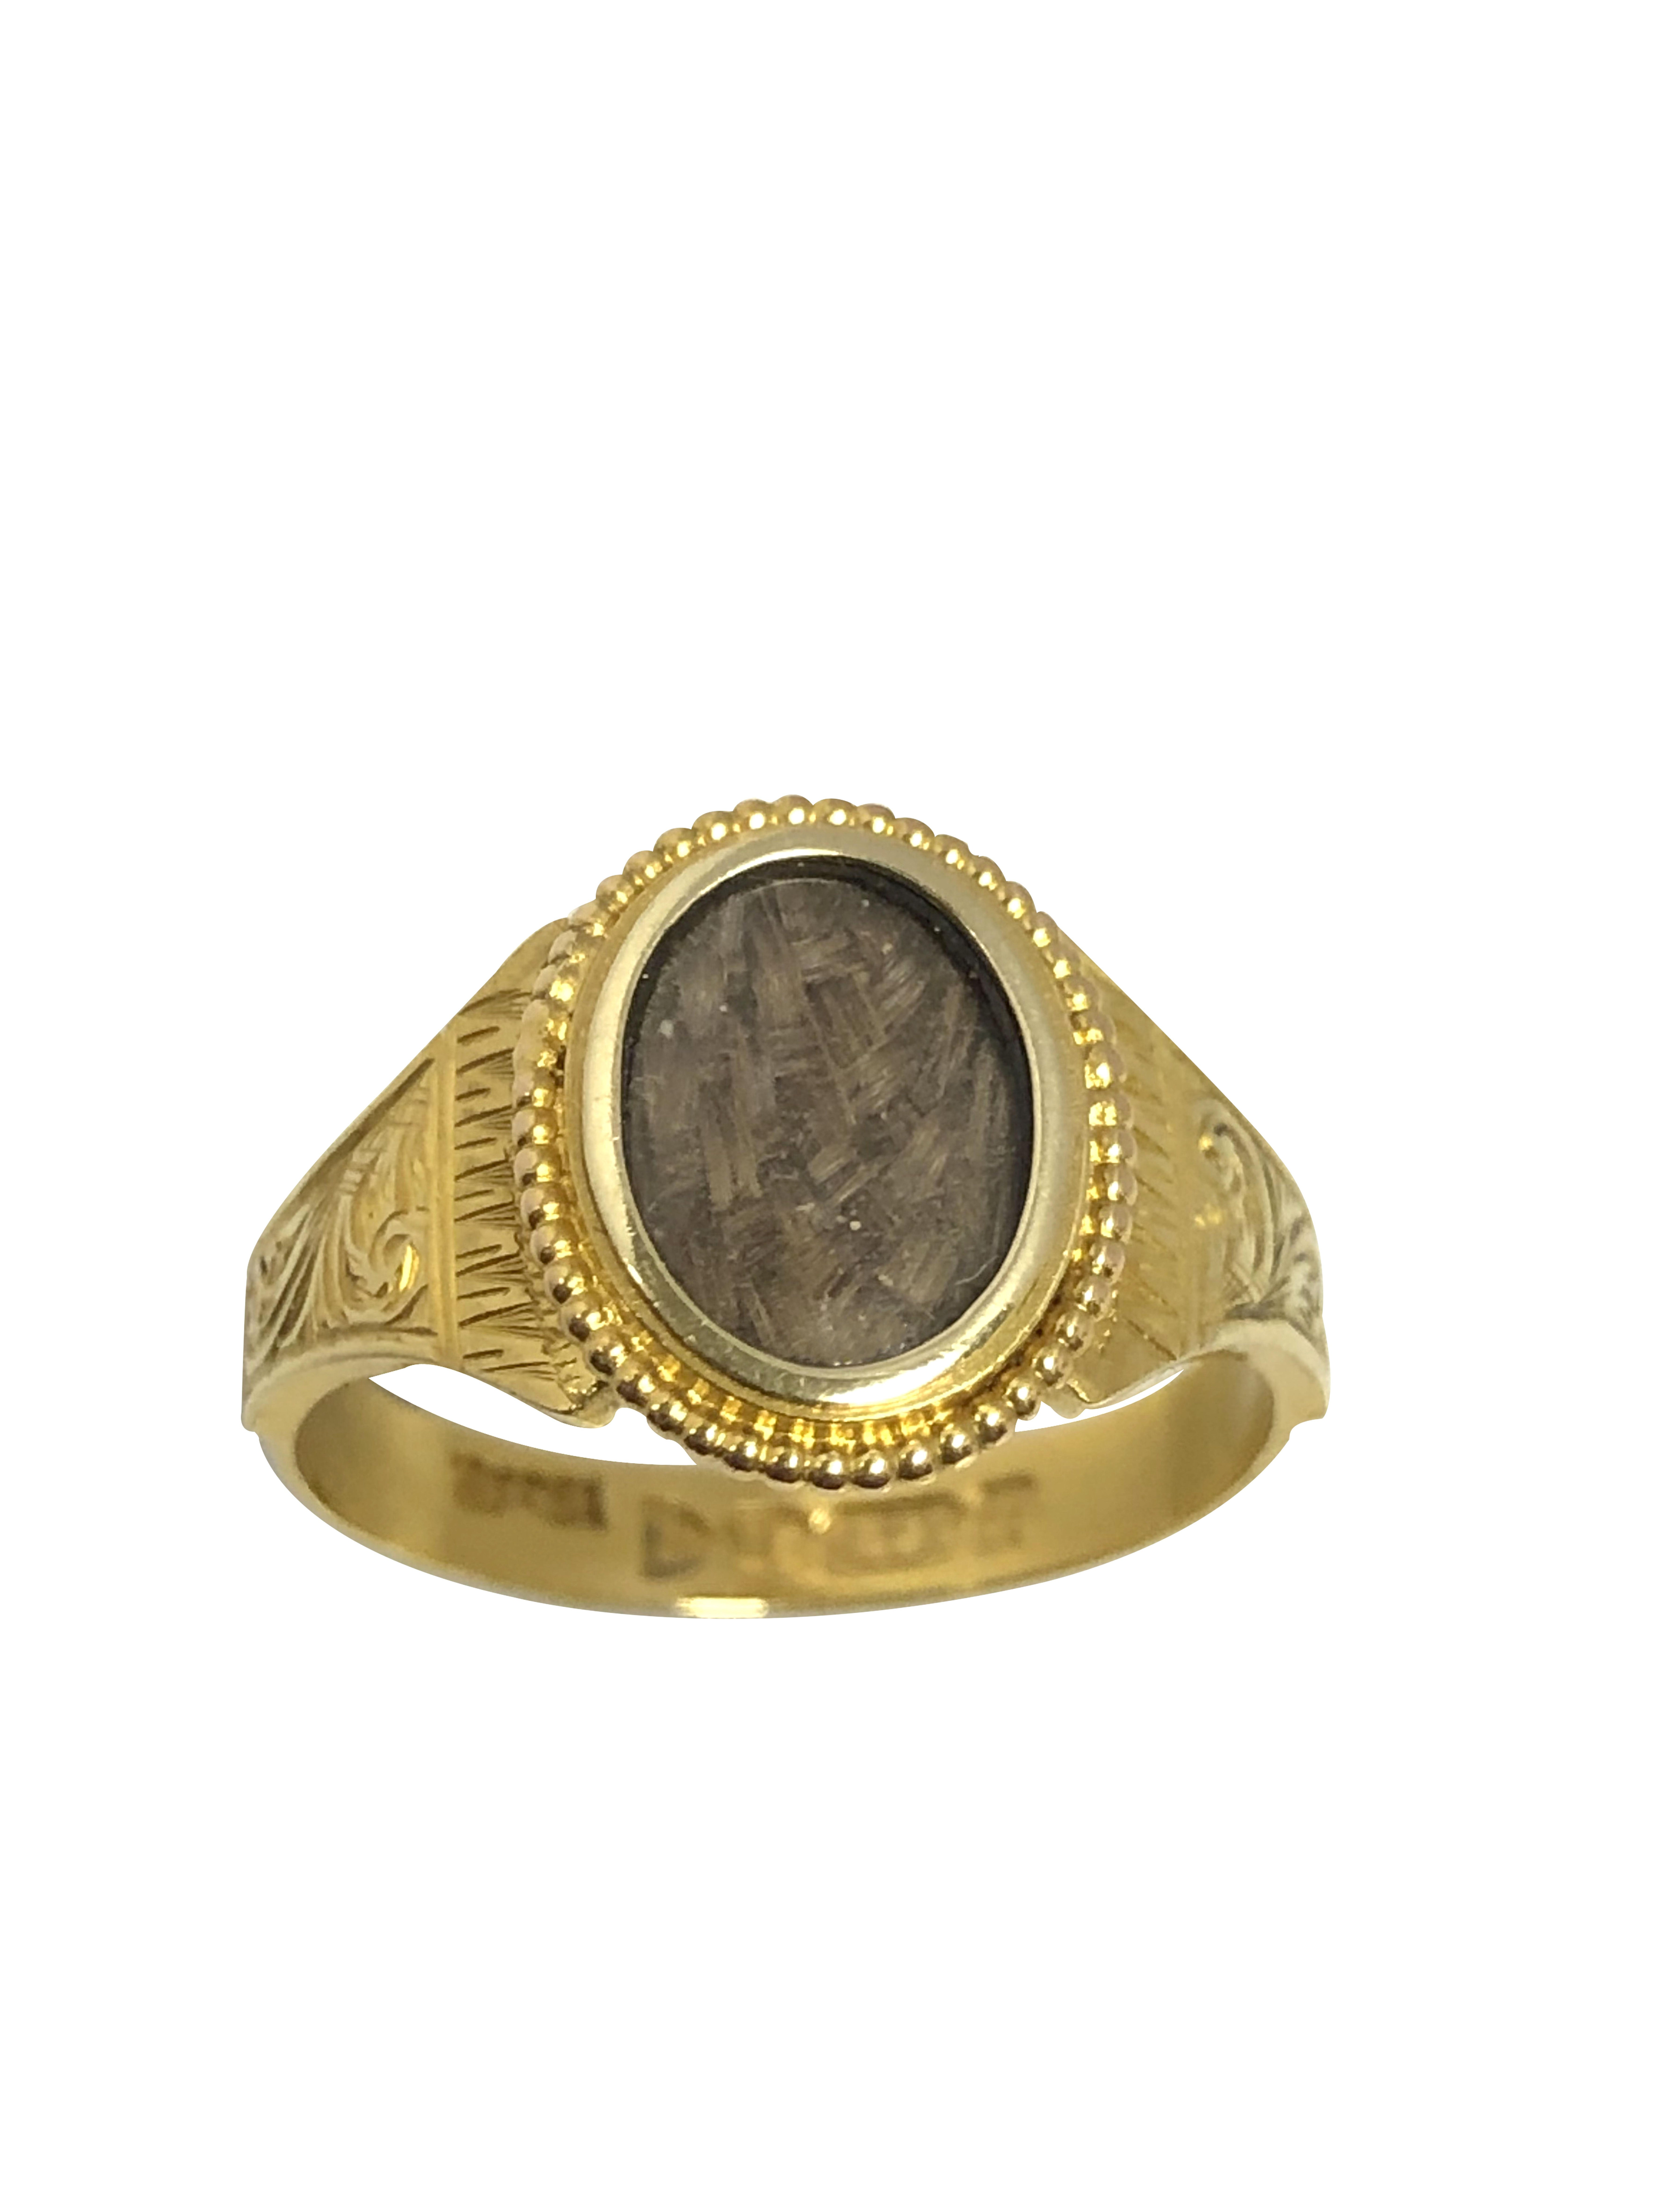 Circa 1908 Victorian Memorial Memento 15K Yellow Gold Ring, the top of the ring measures 13 X 10 M.M. with intricately Woven Hair under Glass, a fine Beaded Border and Hand Engraved Detail work on the sides of the Shank. The underside has Hand